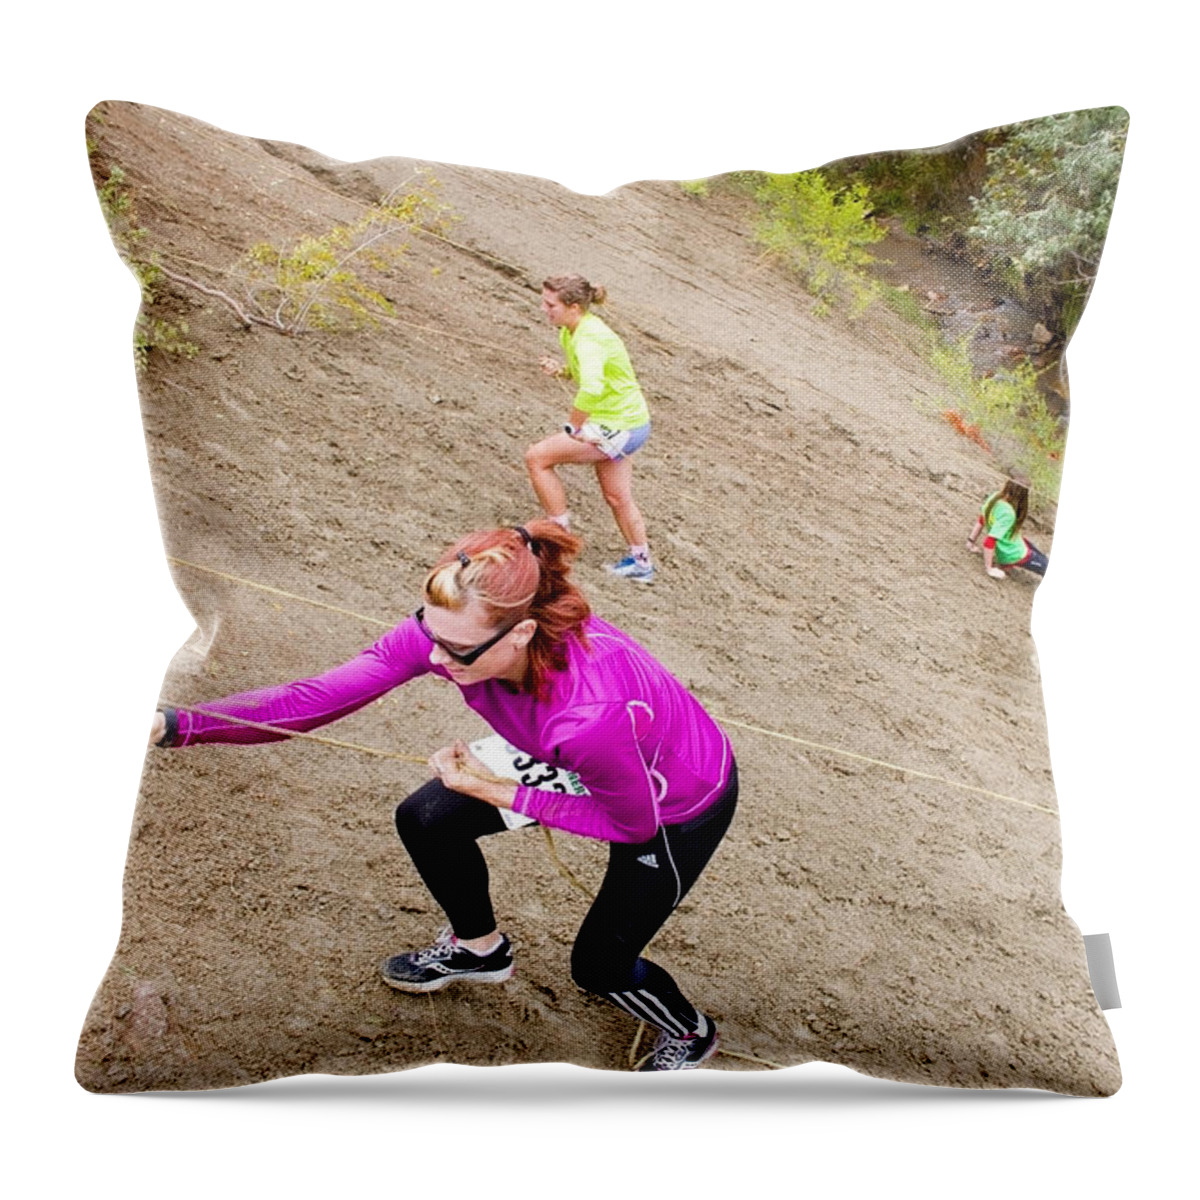 Pikes Peak Road Runners Throw Pillow featuring the photograph Pikes Peak Road Runners Fall Series Race #11 by Steven Krull